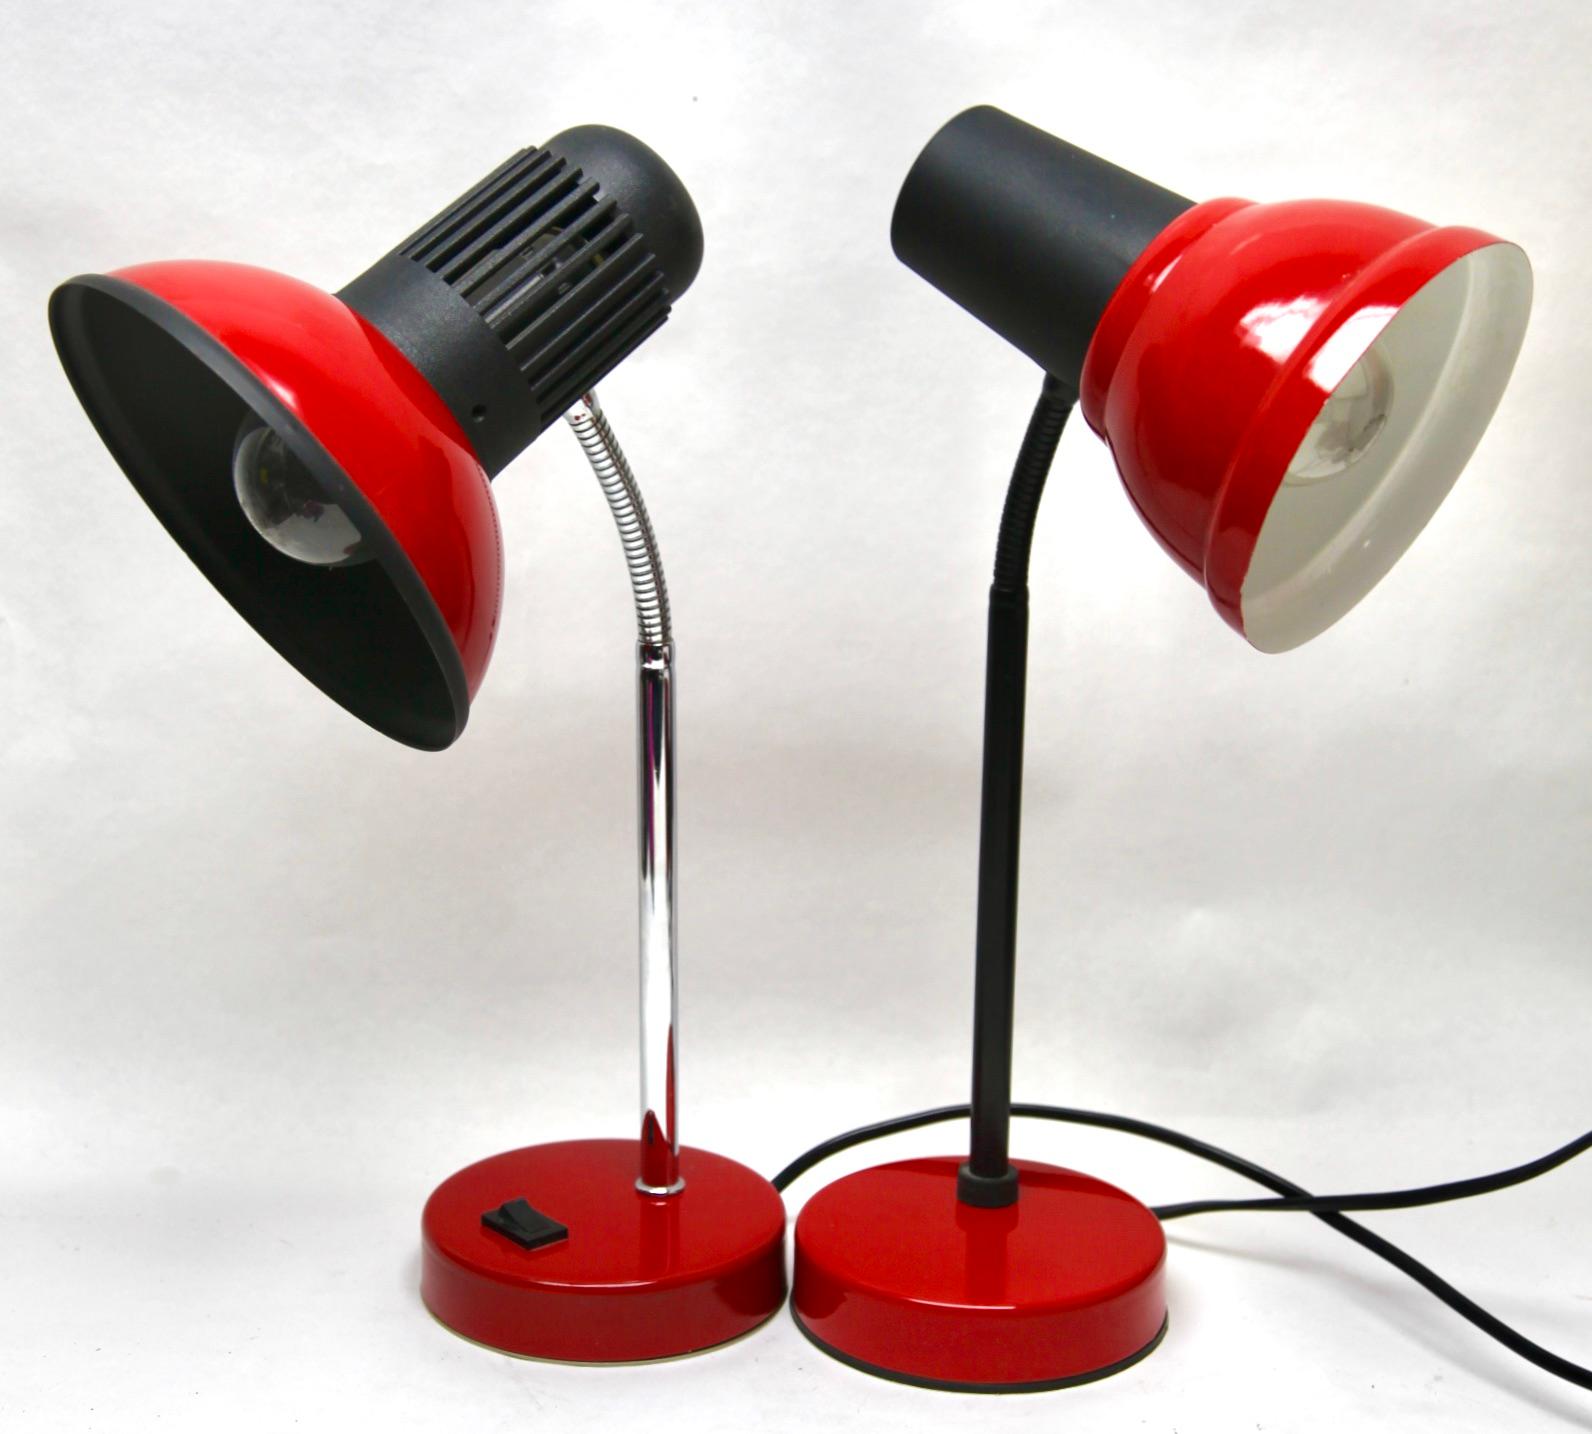 Late 20th Century Vintage Red Adjustable Desk/Side Table Lamp by Massive Whit Label, 1970s For Sale